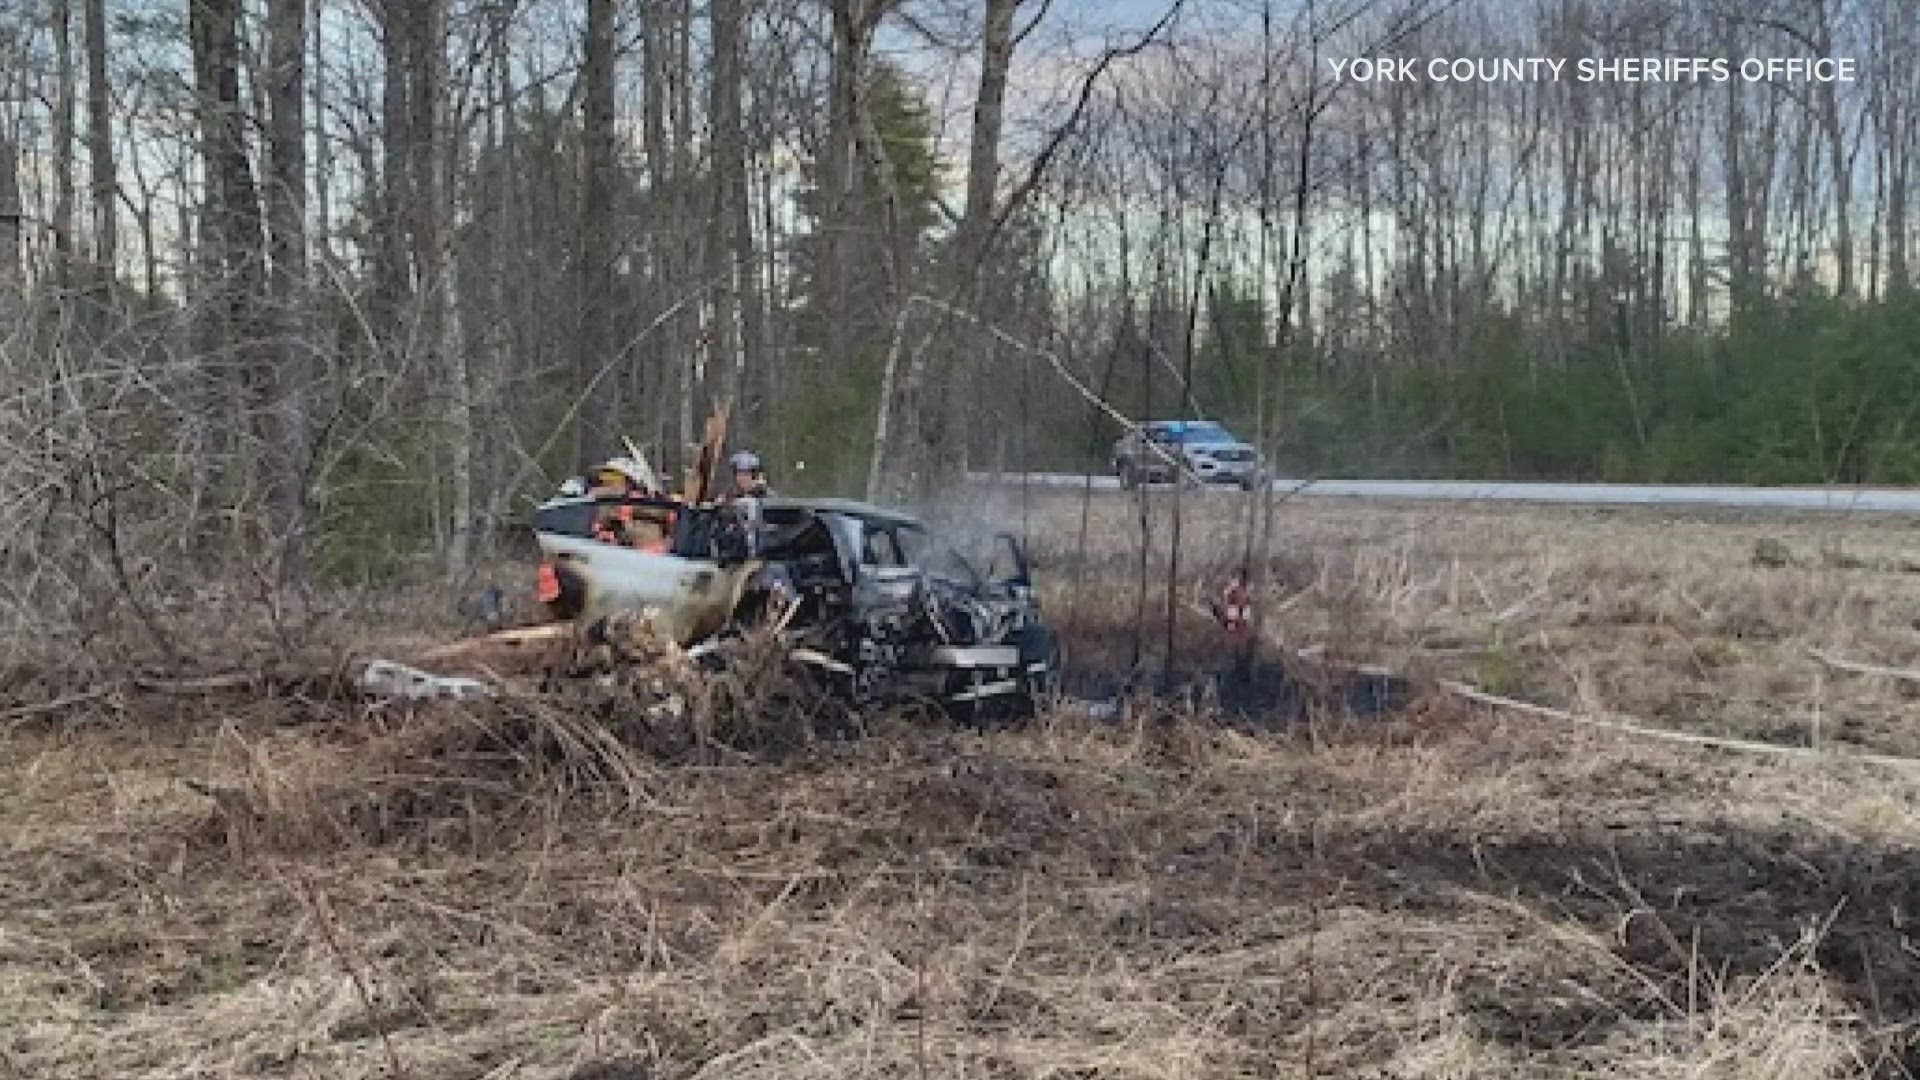 Witnesses reportedly told deputies a passerby pulled the driver out of the vehicle after seeing the fire, but the passerby left the scene before officials arrived.